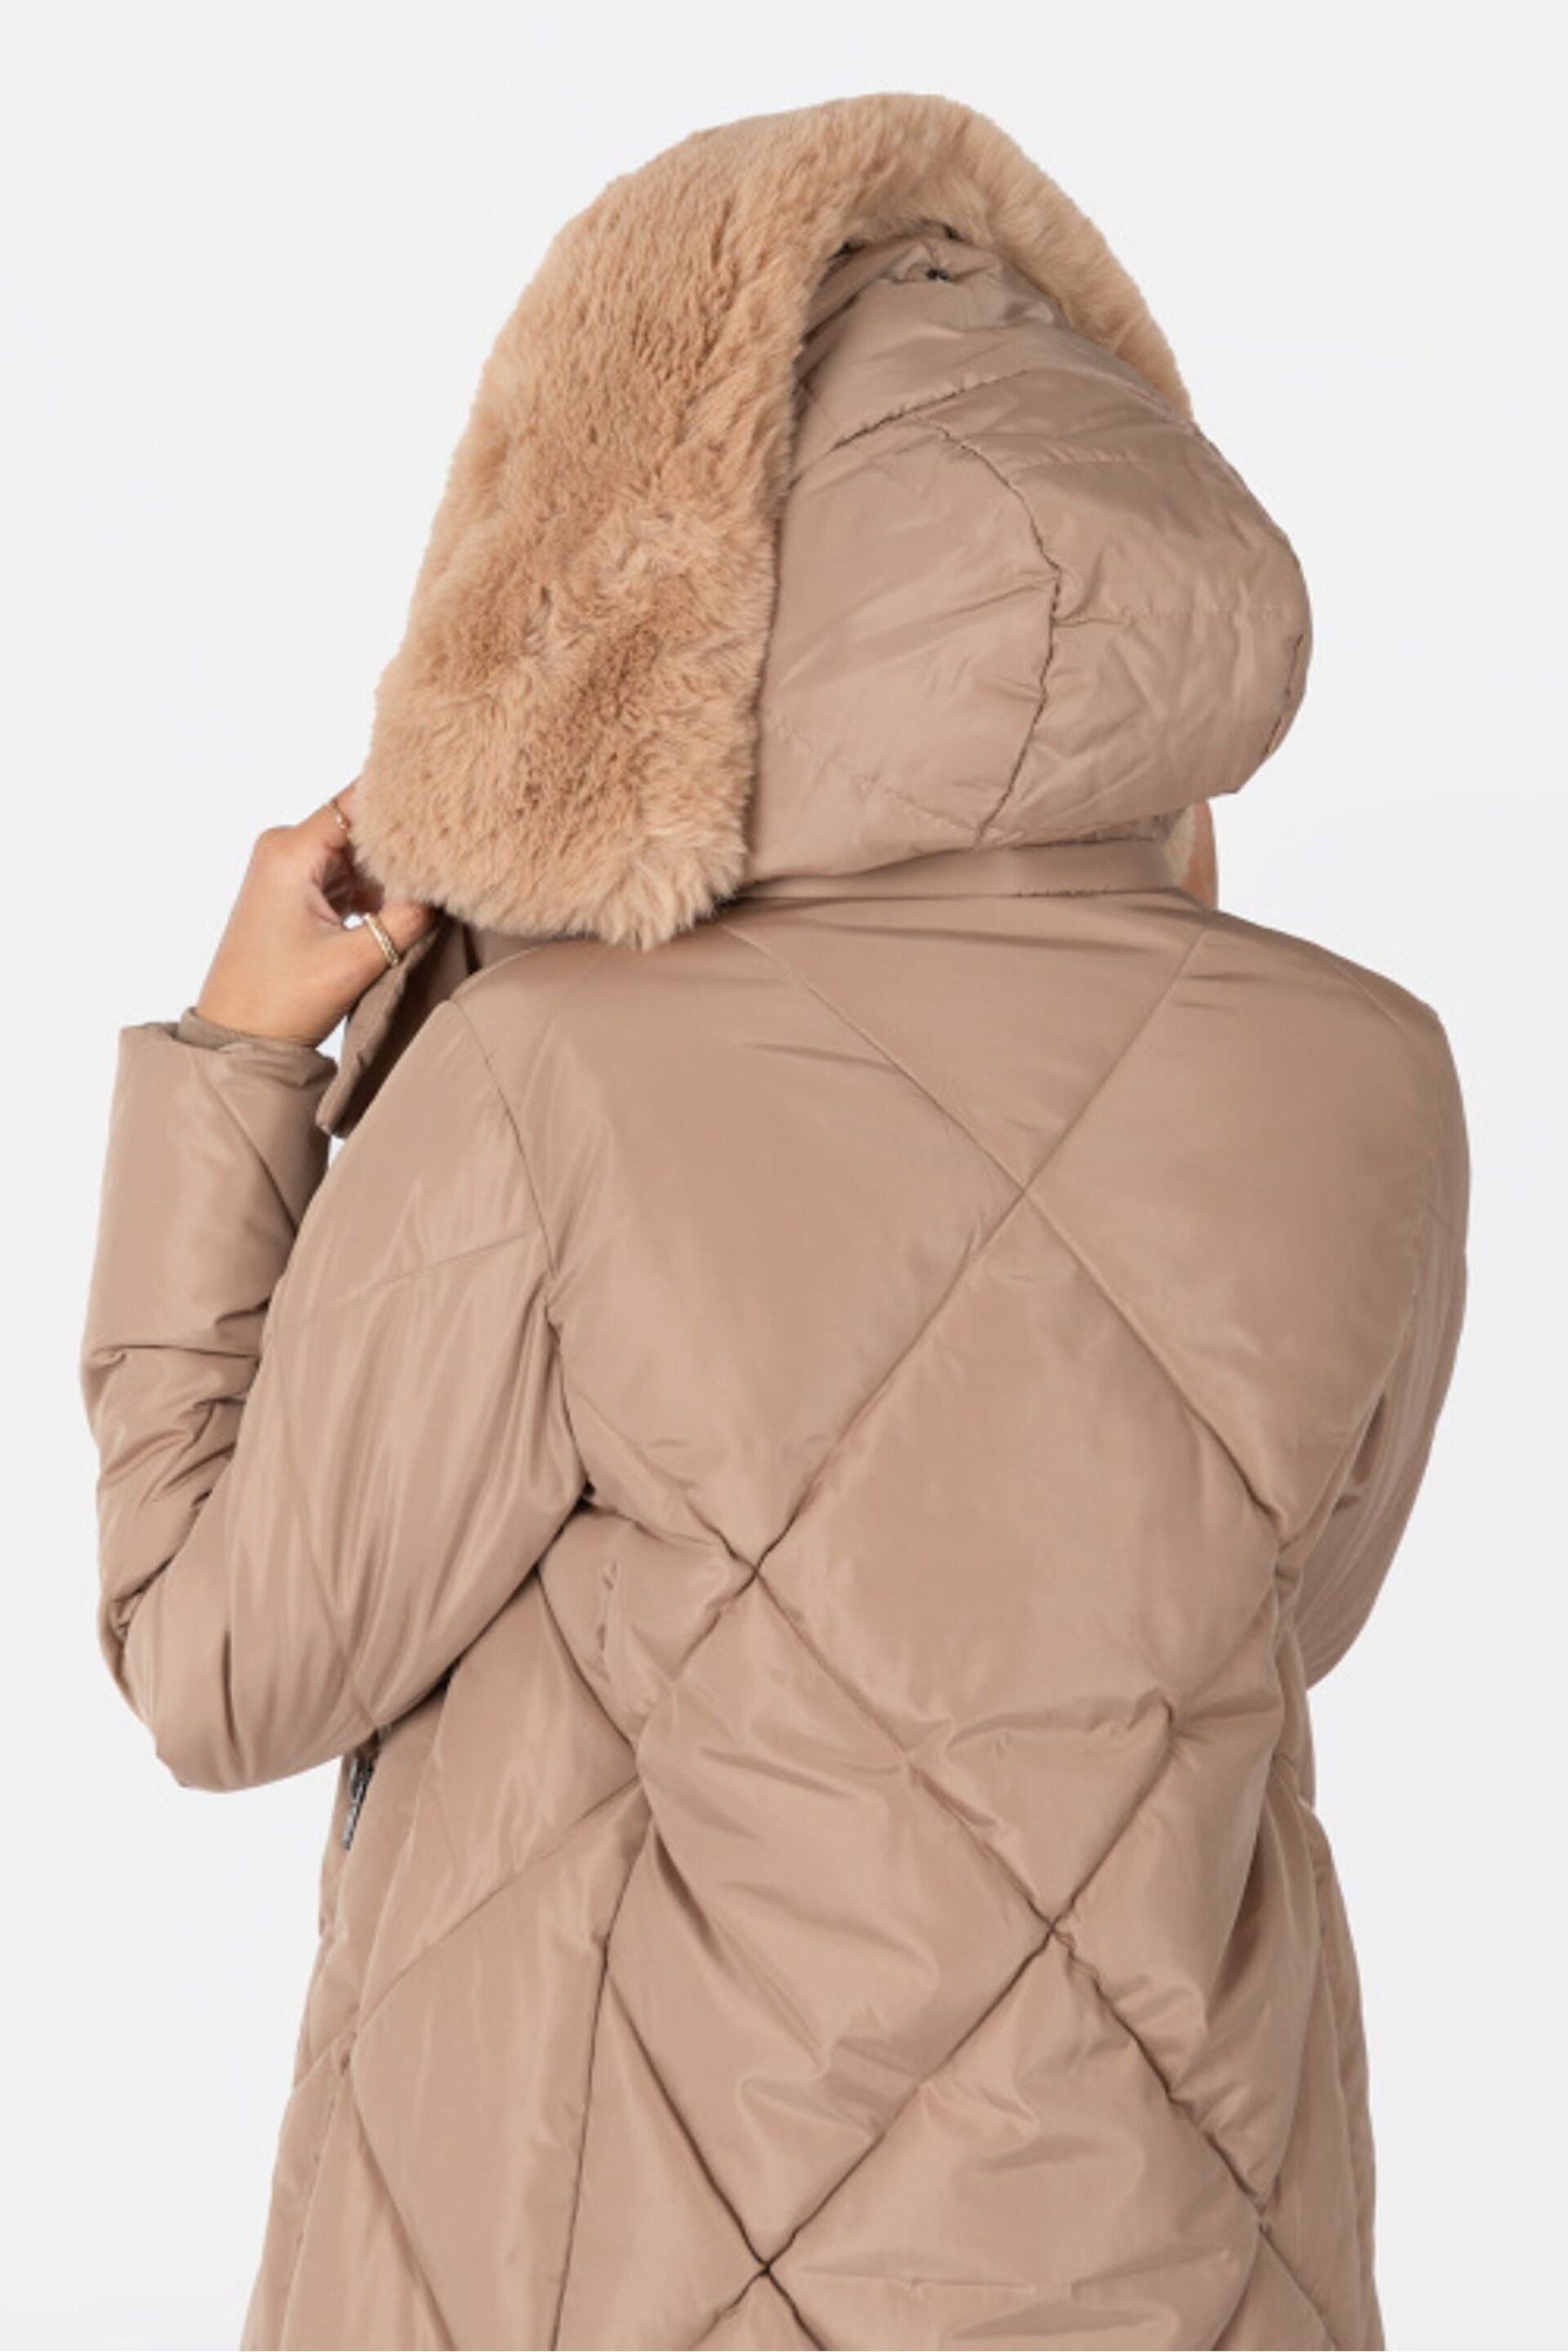 Longline Padded Coat with Faux Fur Trim Removable Hood - Image 5 of 6